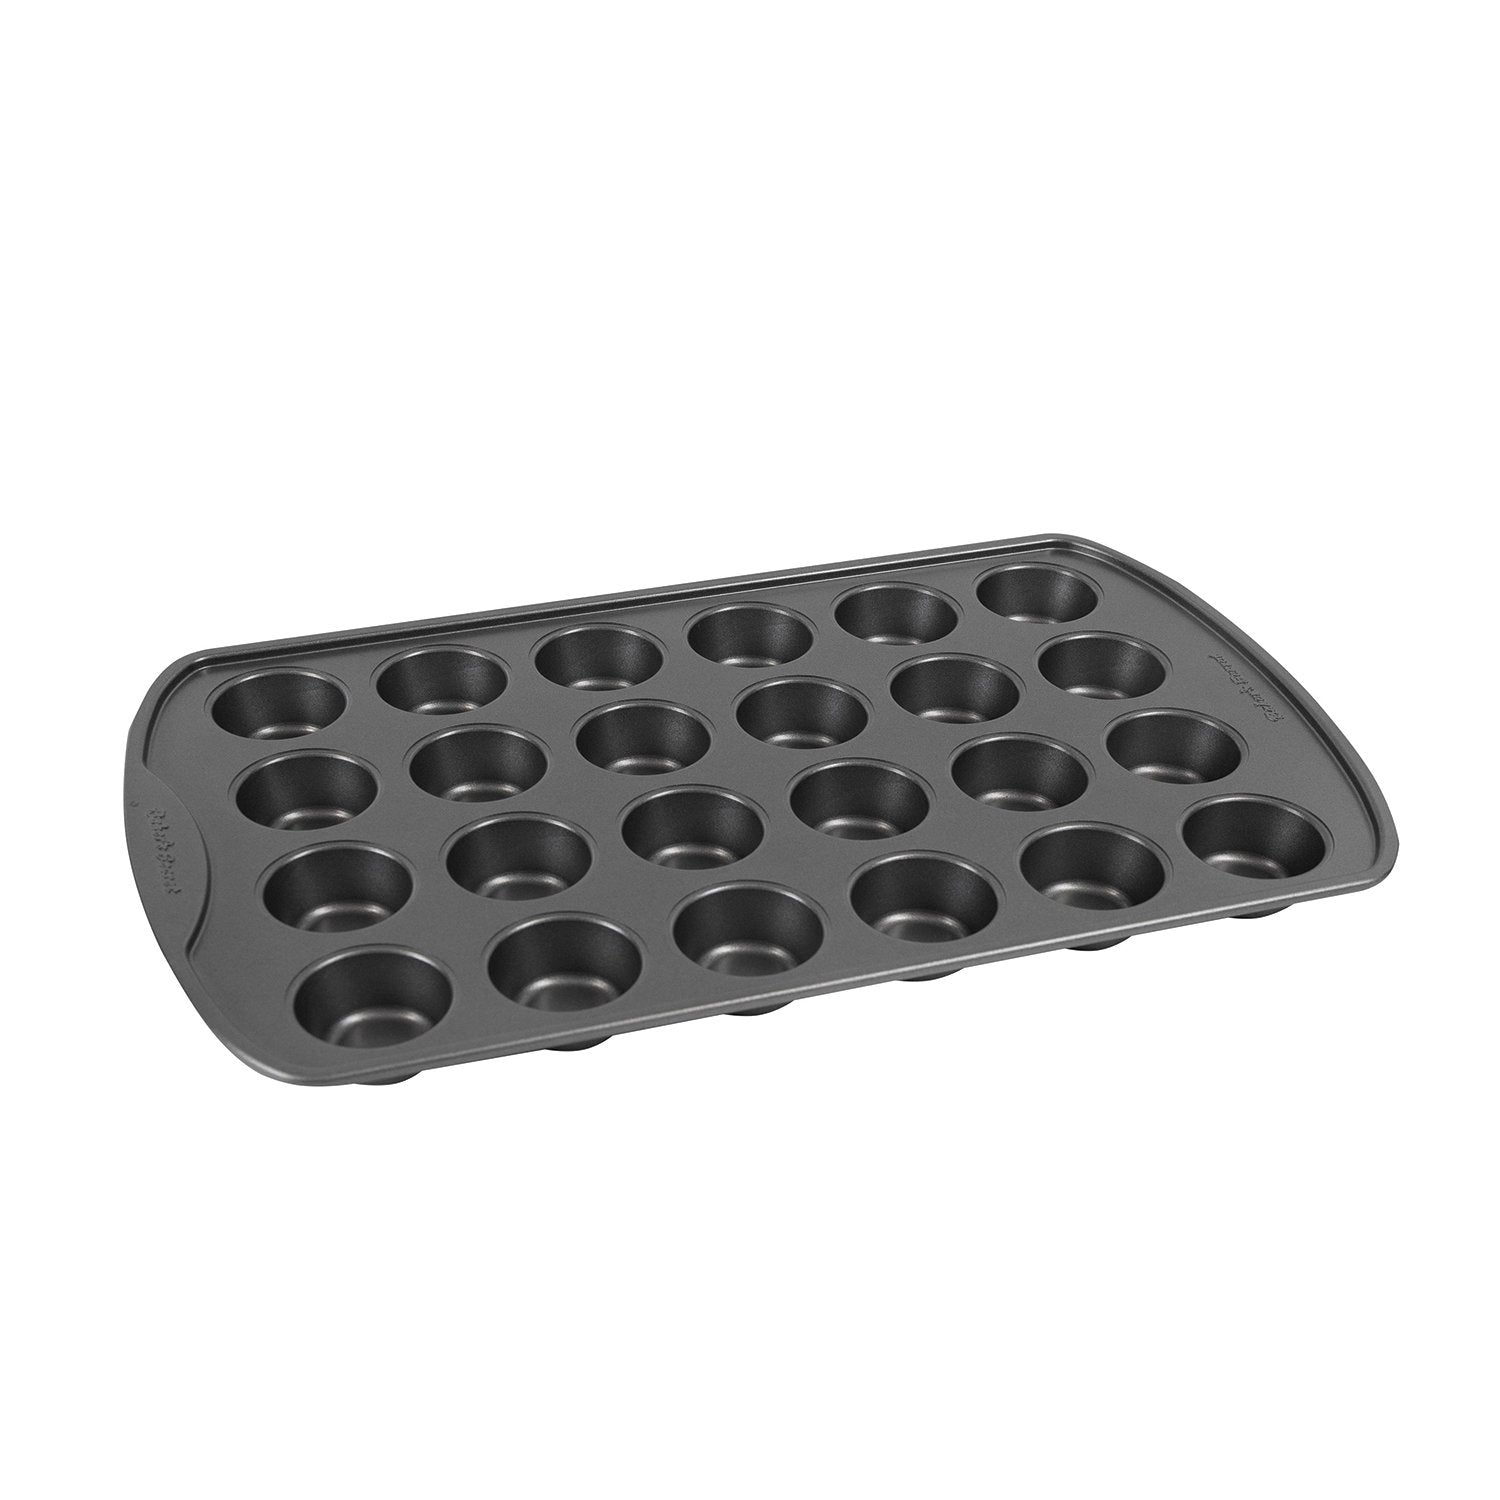 Baker's Secret 2cup Giant Cupcake Pan - Carbon Steel Pan for Giant